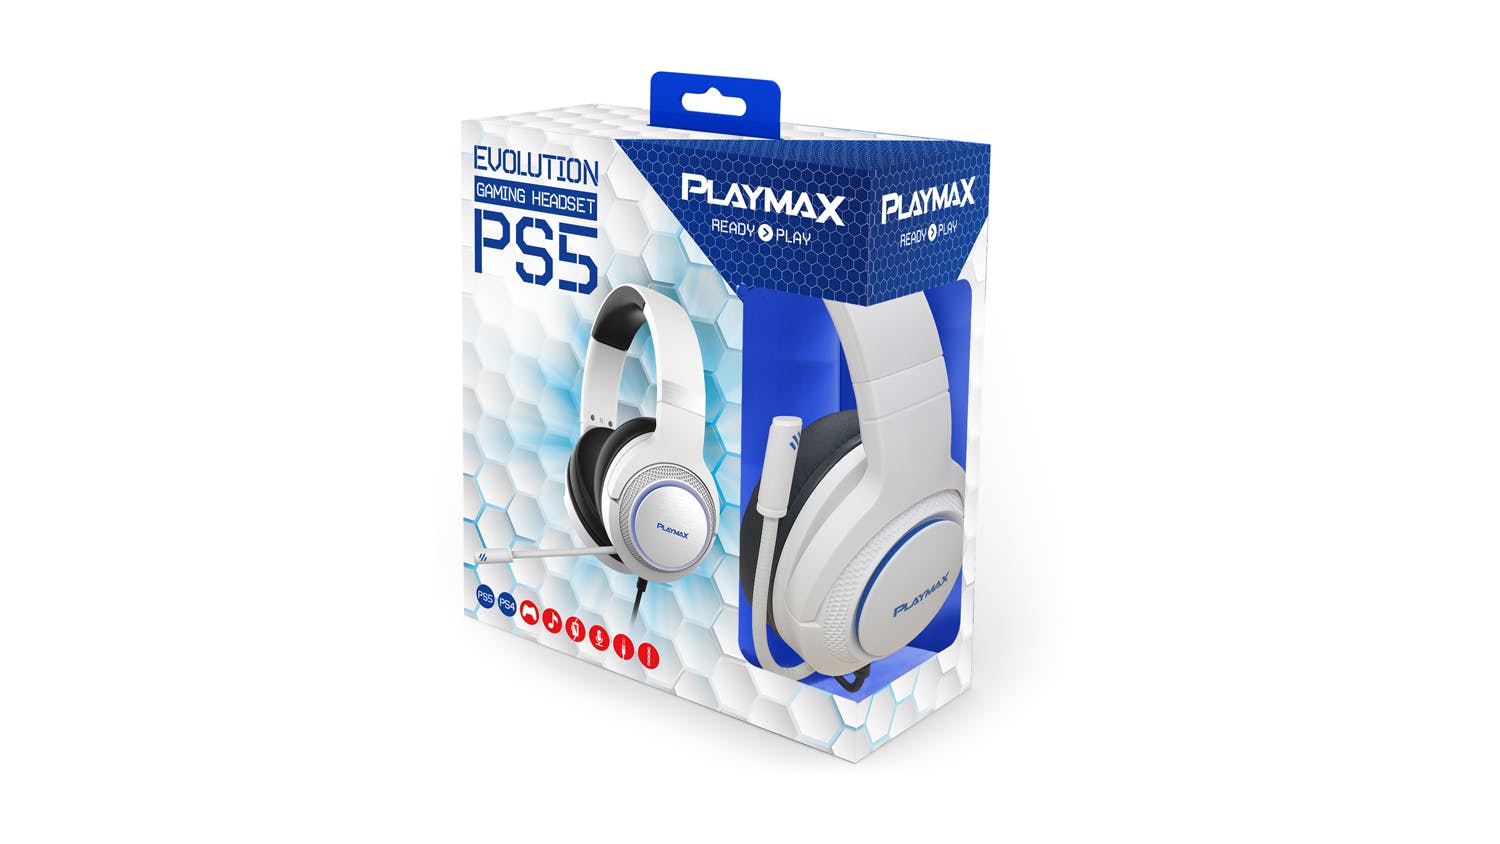 Playmax Evolution Headset - PS5